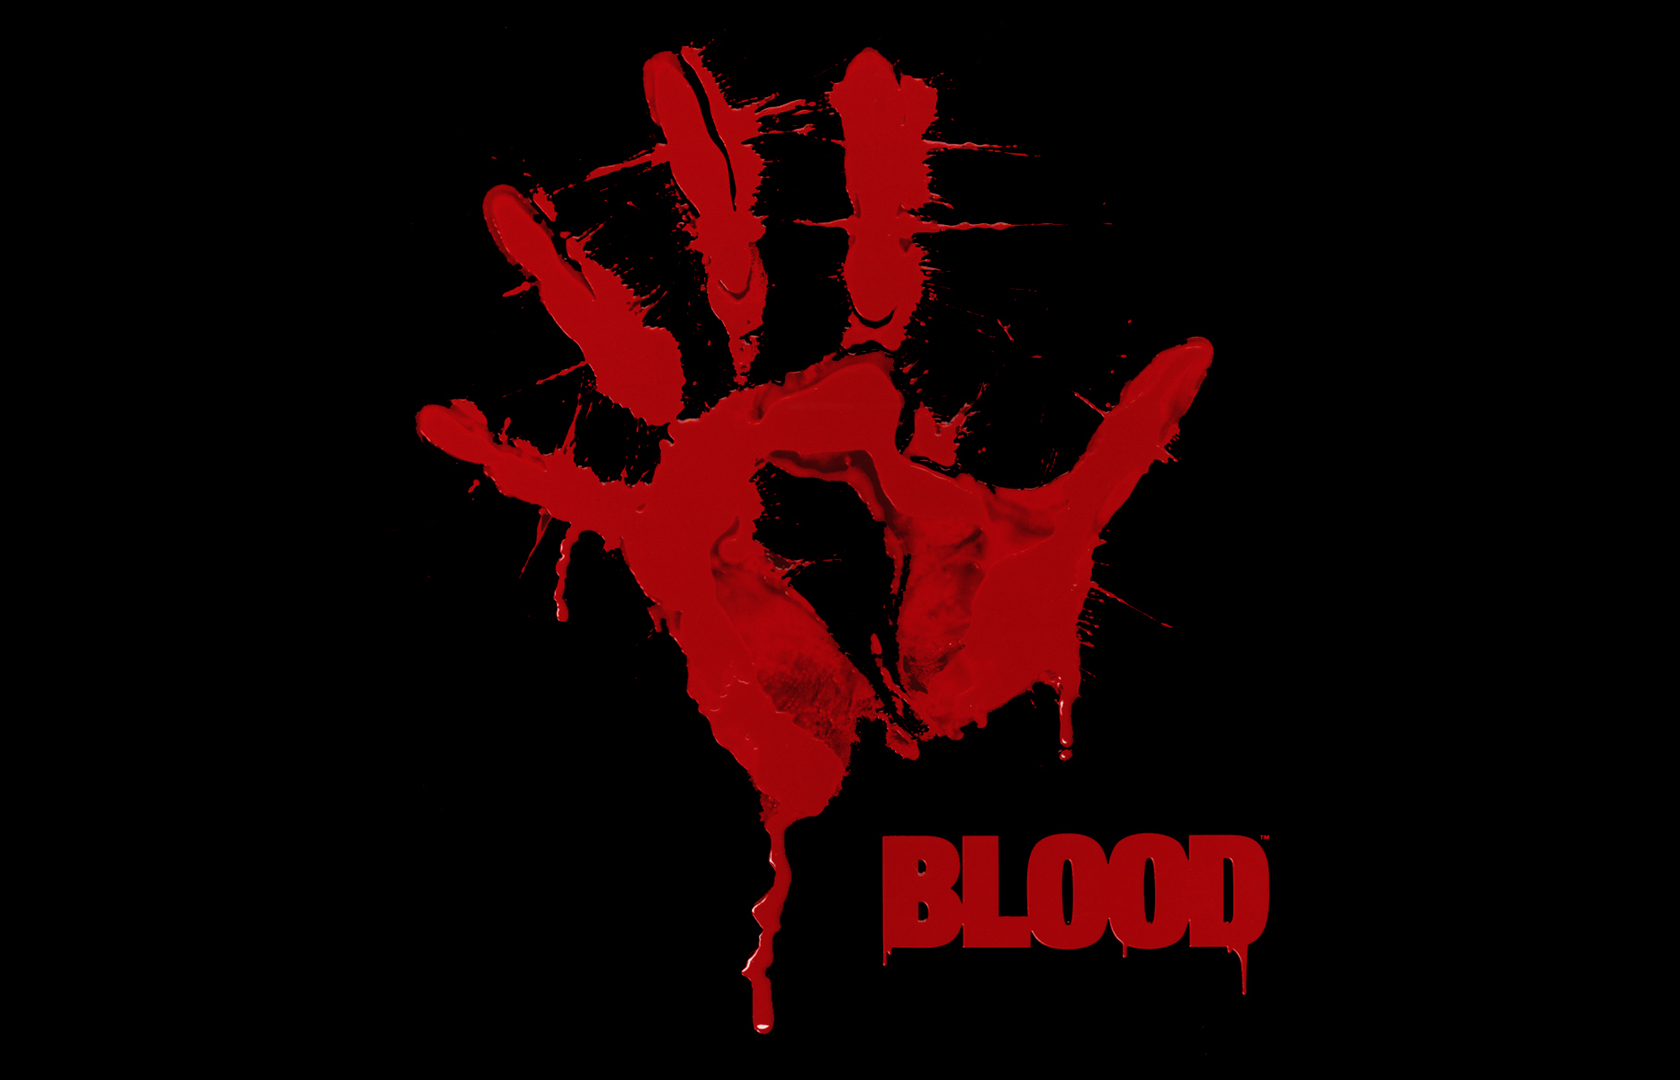 Hand Blood Wallpaper images